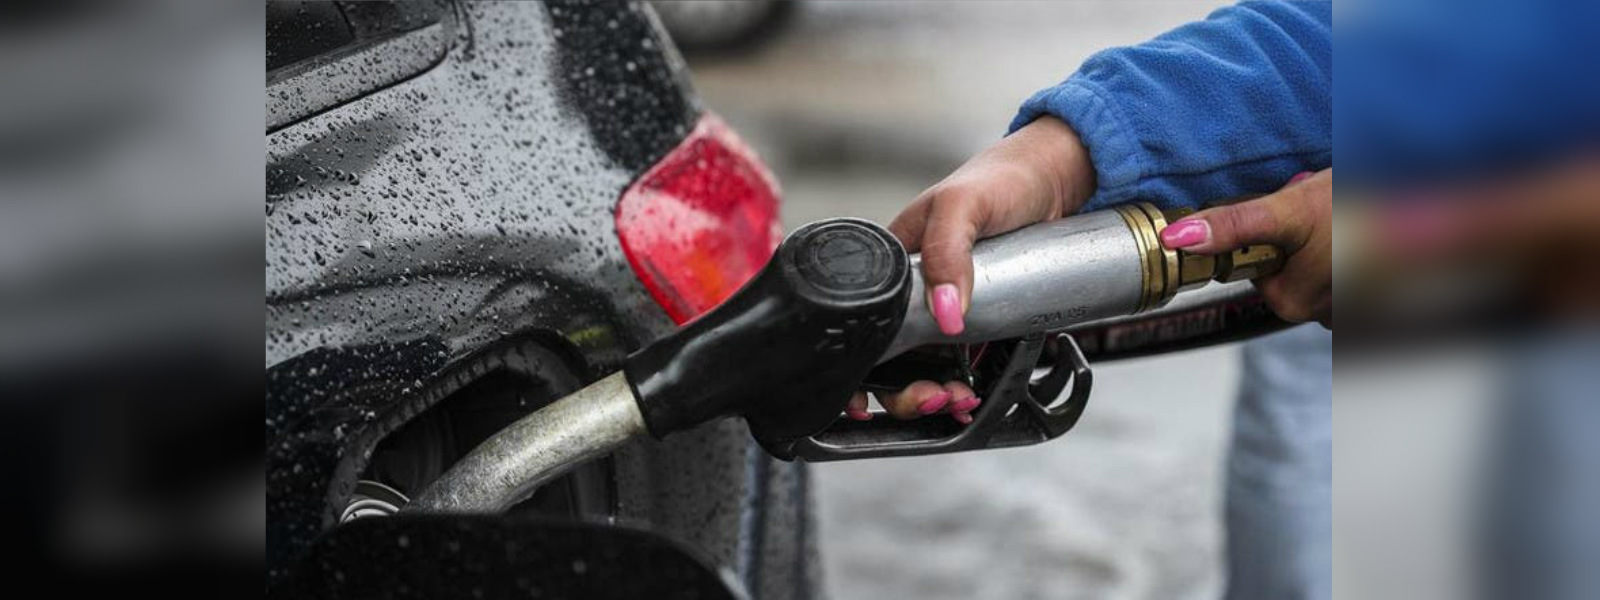 Portuguese fuel drivers strike, government imposes rationing